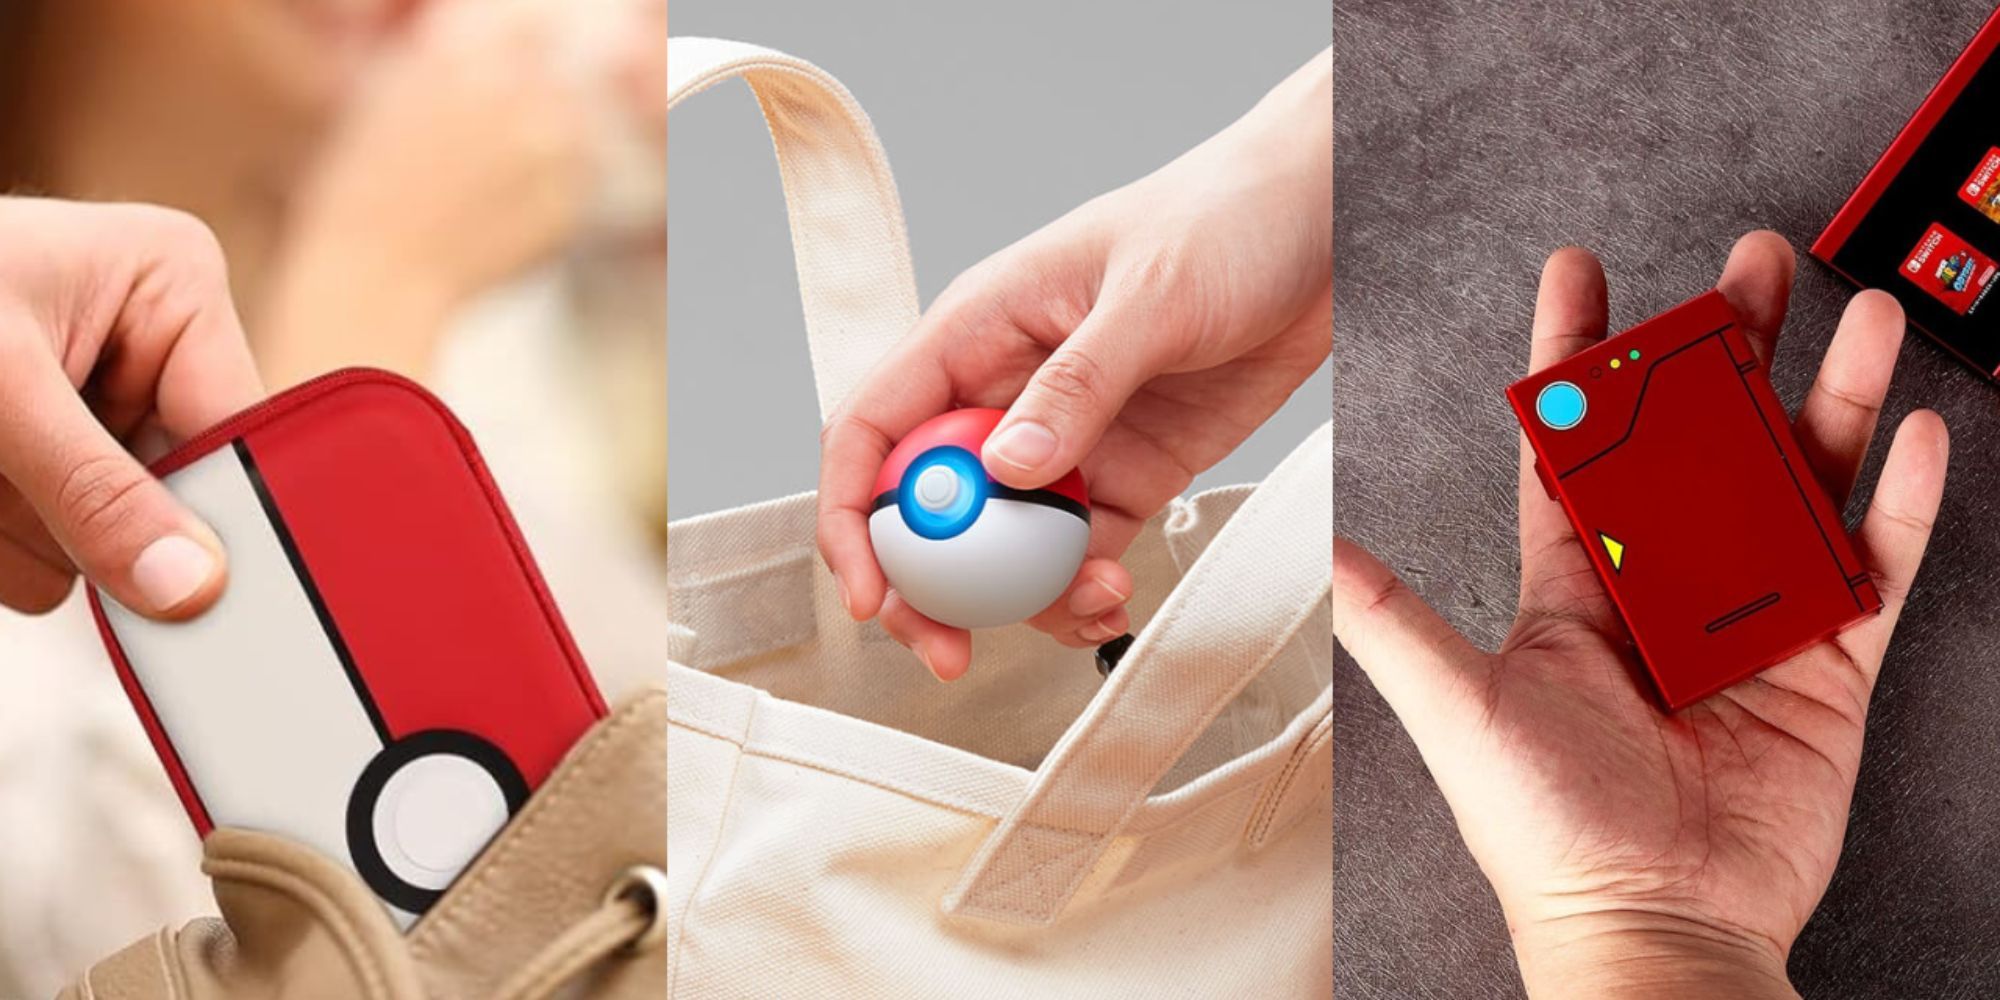 Split image of the JoyHood Pokemon carry case being pulled from a bag, the Poke Ball Plus being put into a canvas bag, and a Poke Dex game cartridge holder in the palm of a hand., 